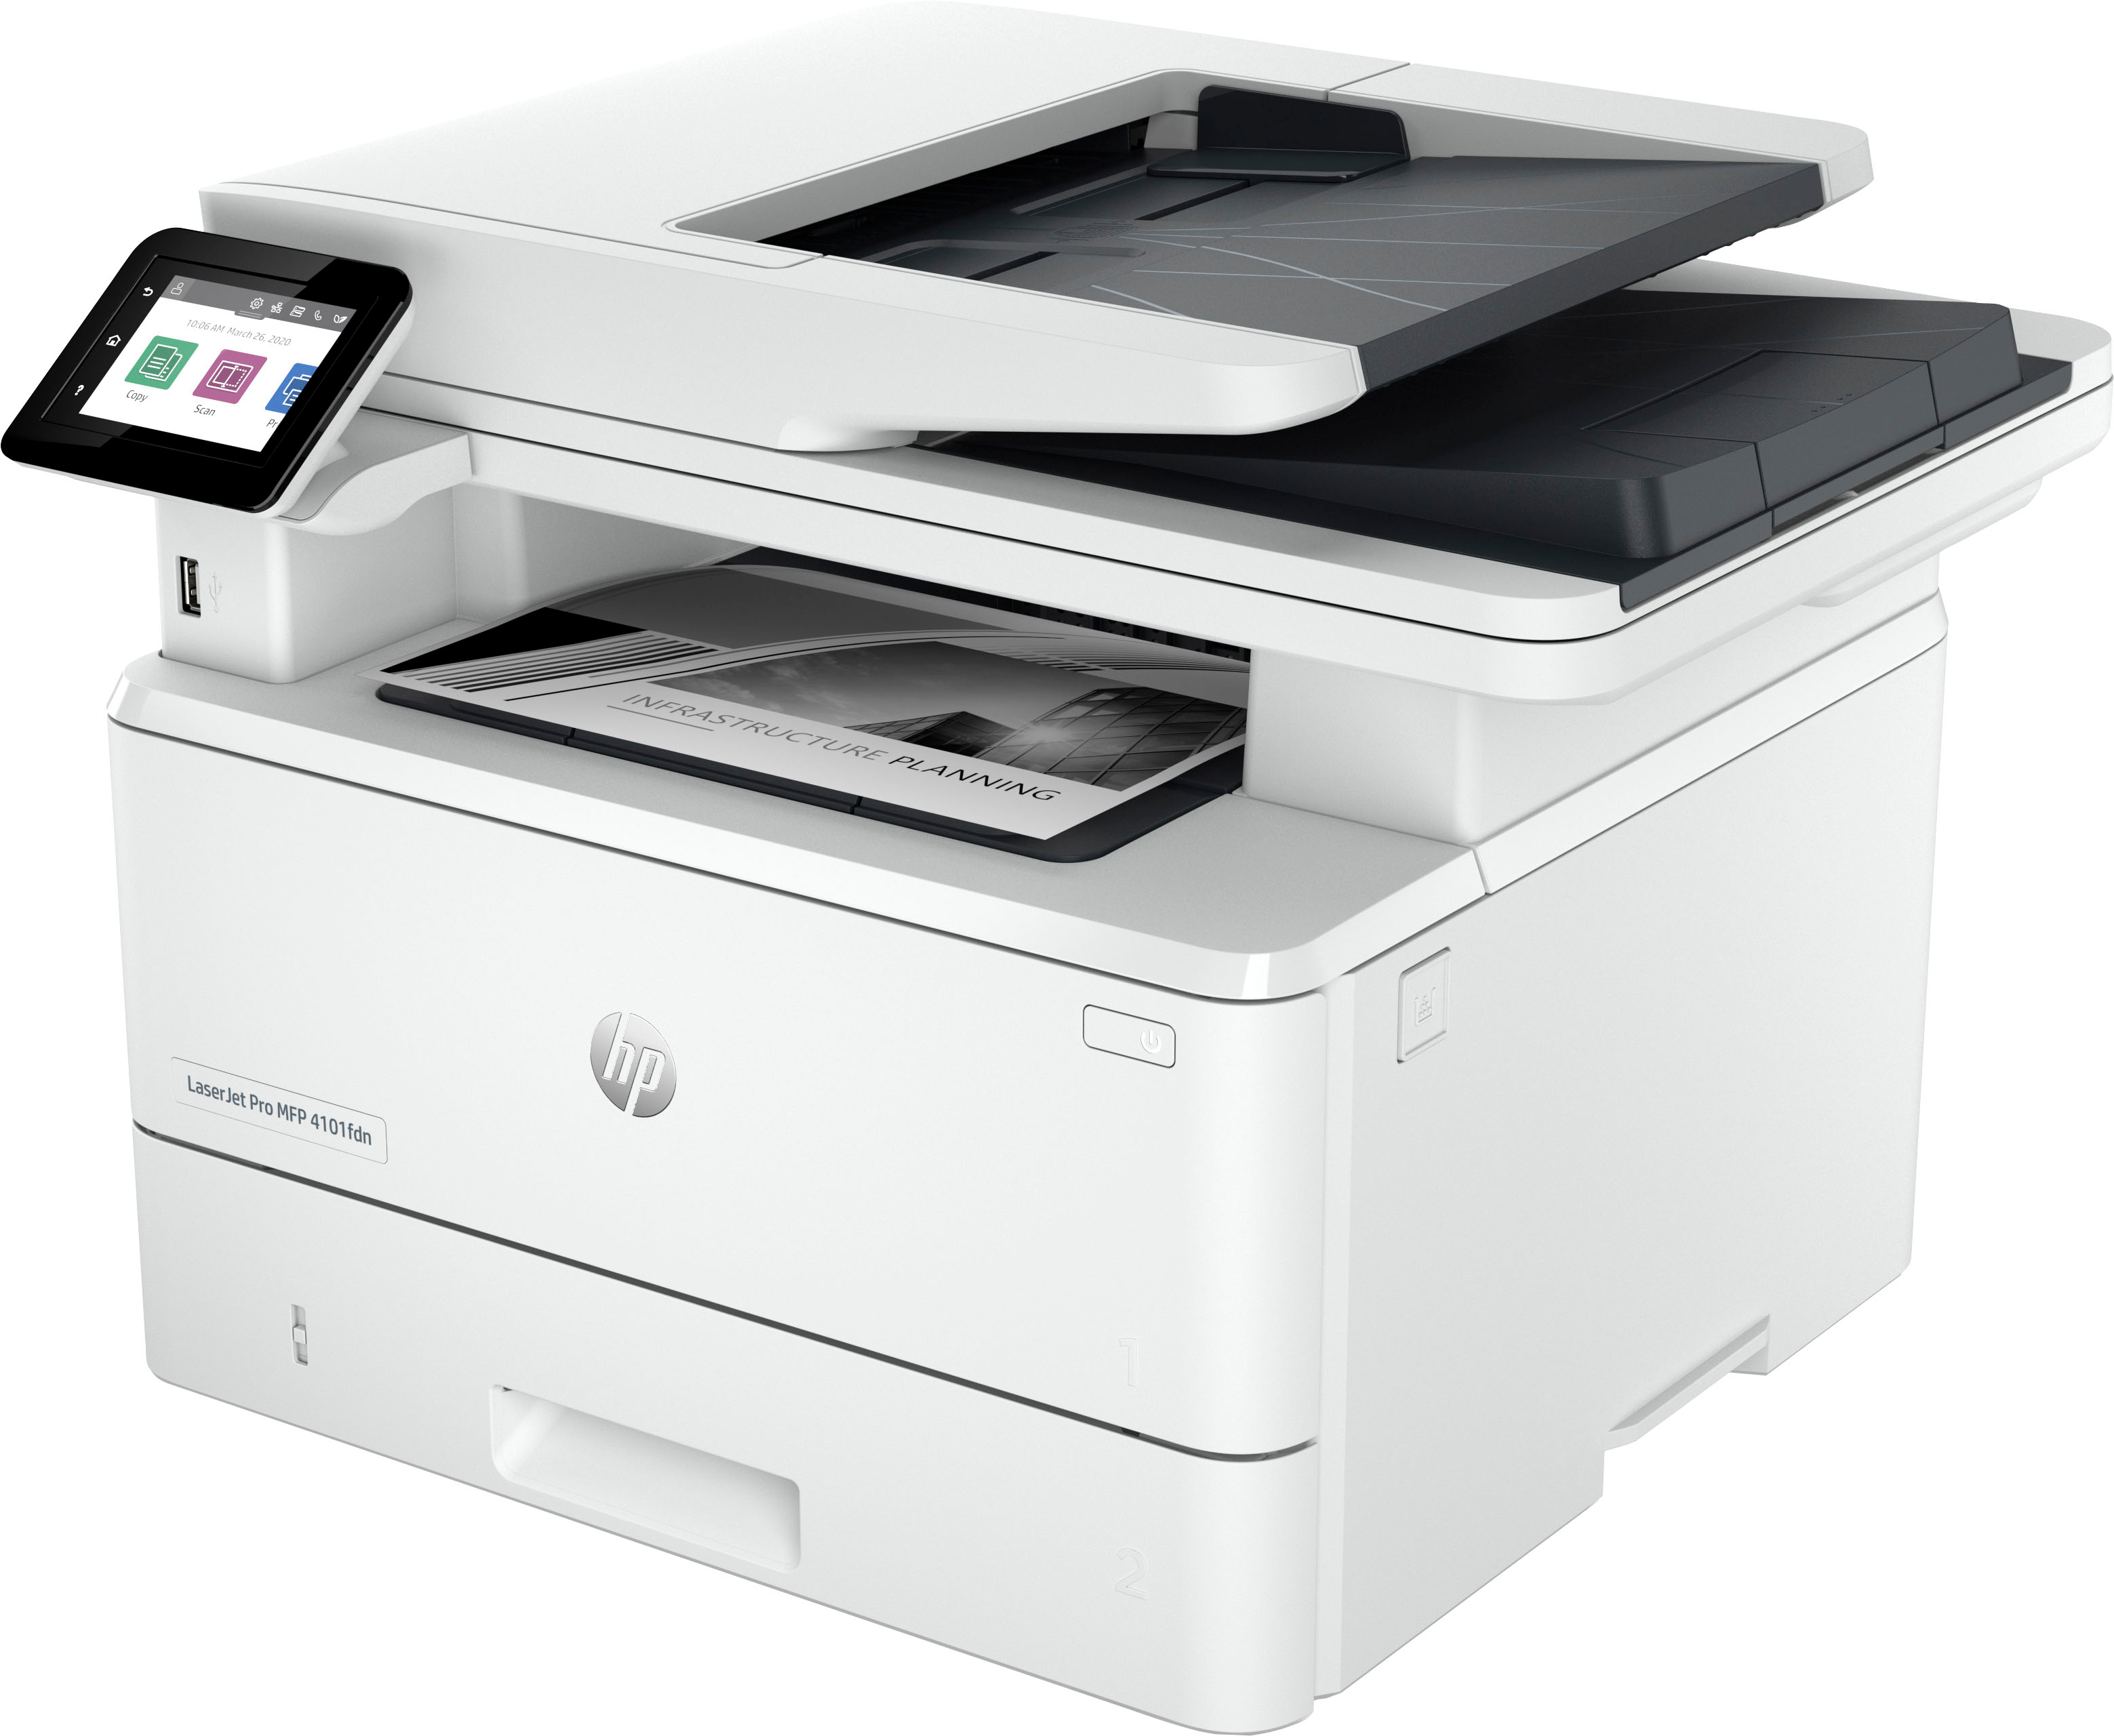 Angle View: Brother - MFC-L5705DW Wireless Black-and-White All-in-One Laser Printer - Grey/Black